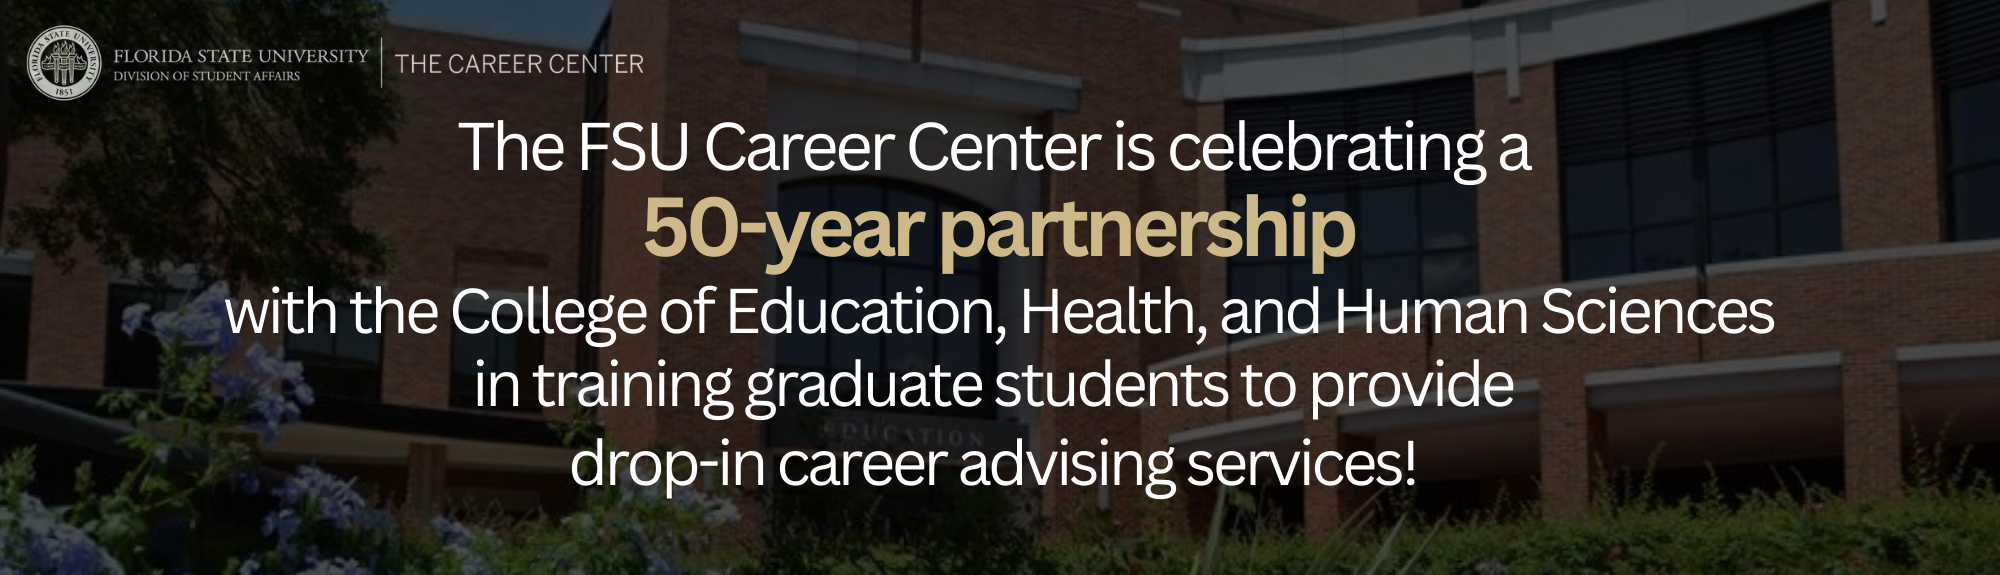 50 year partnership with College of Education, Health, and Human Sciences